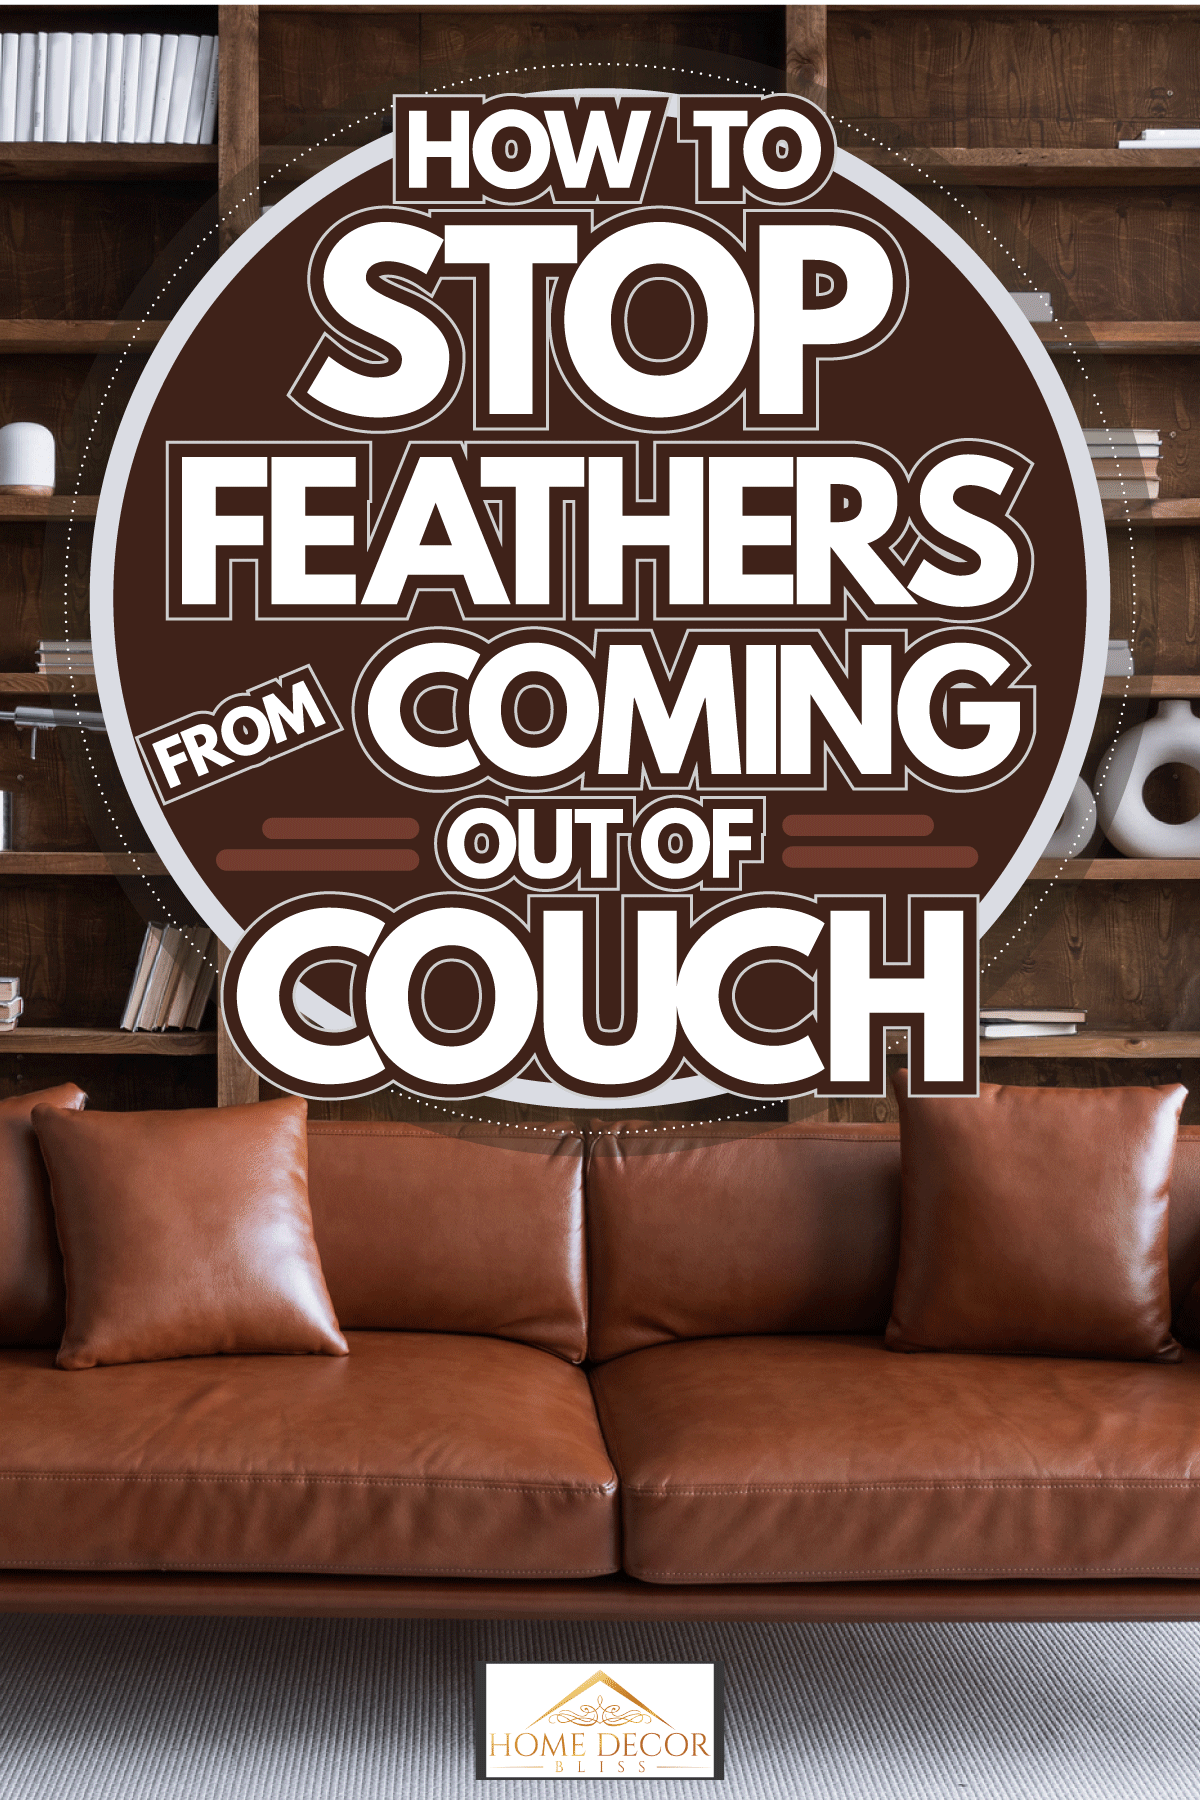 Leather sofa with cushions standing on living room with stylish interior design and collections books on bookshelves, How To Stop Feathers From Coming Out Of Couch